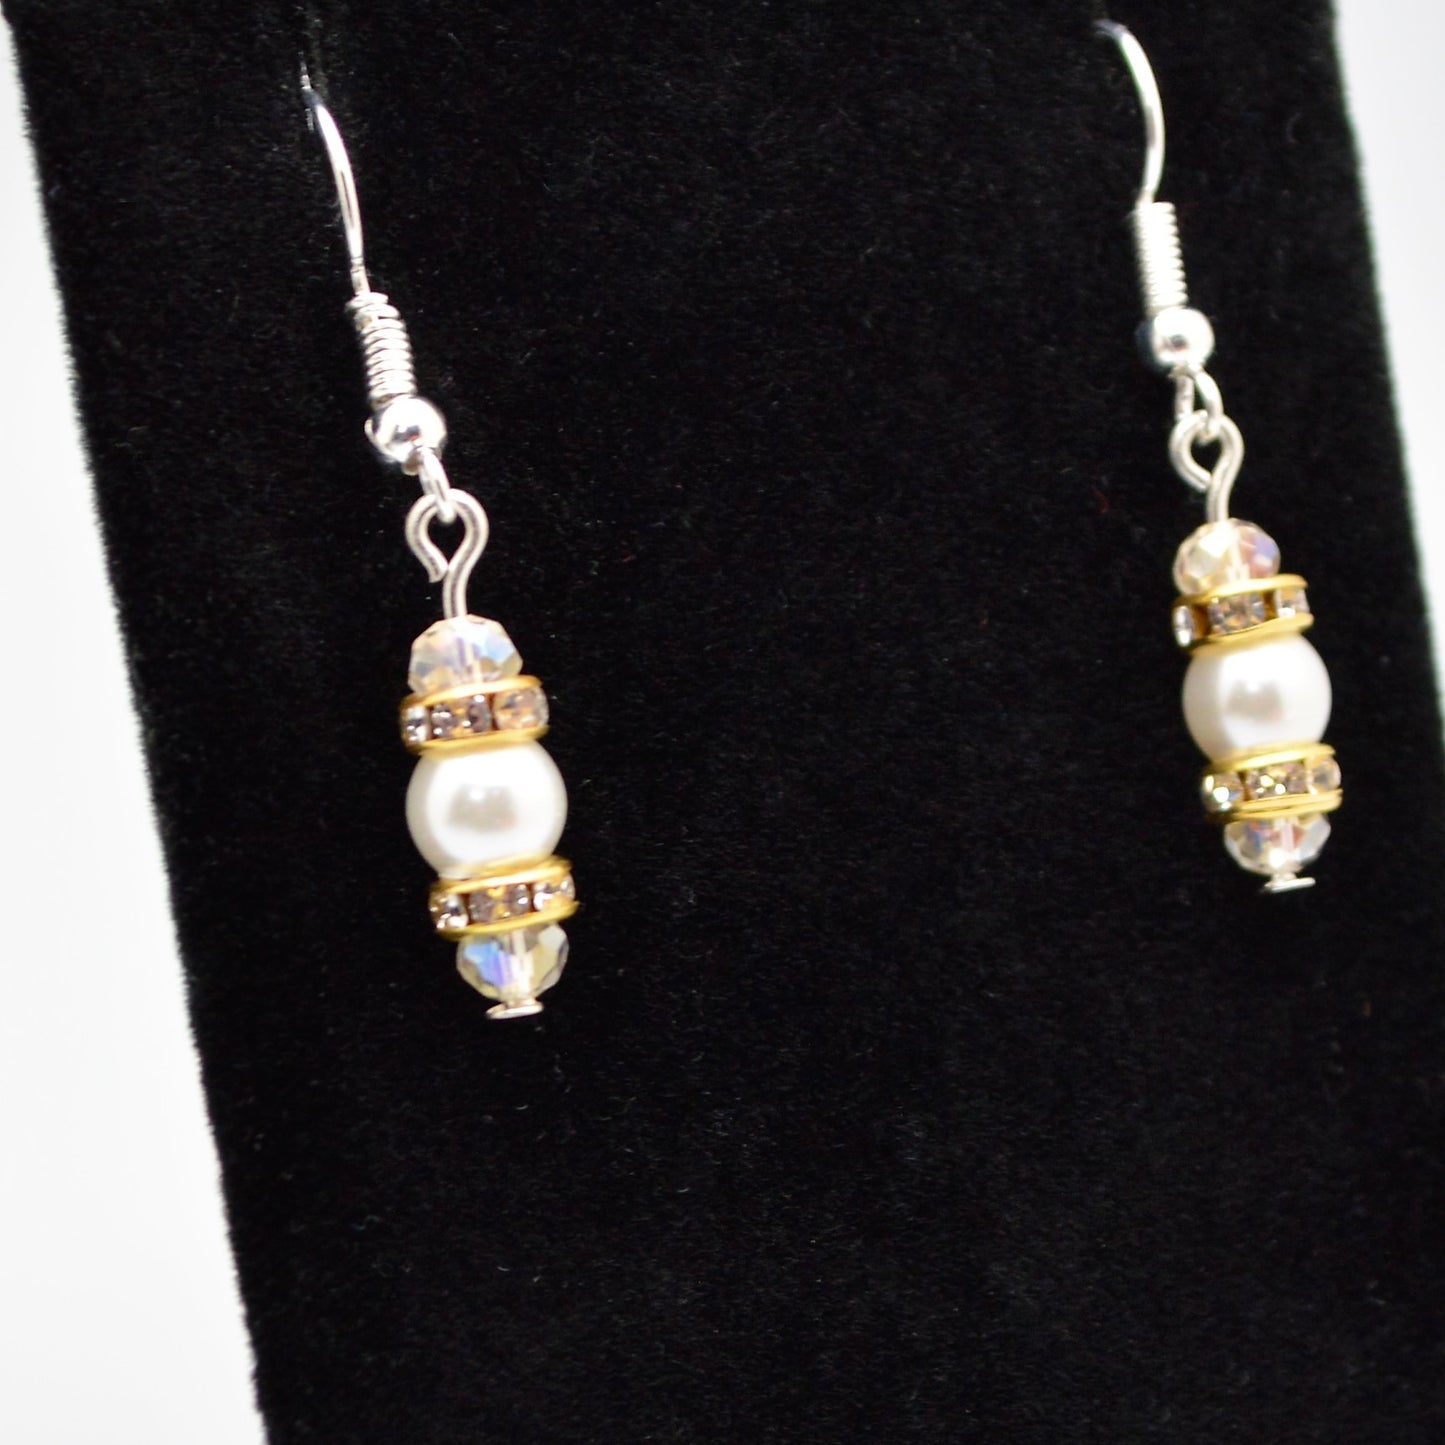 White Glass Pearl and Crystal Earrings (6mm Pearls with Silver Hooks)